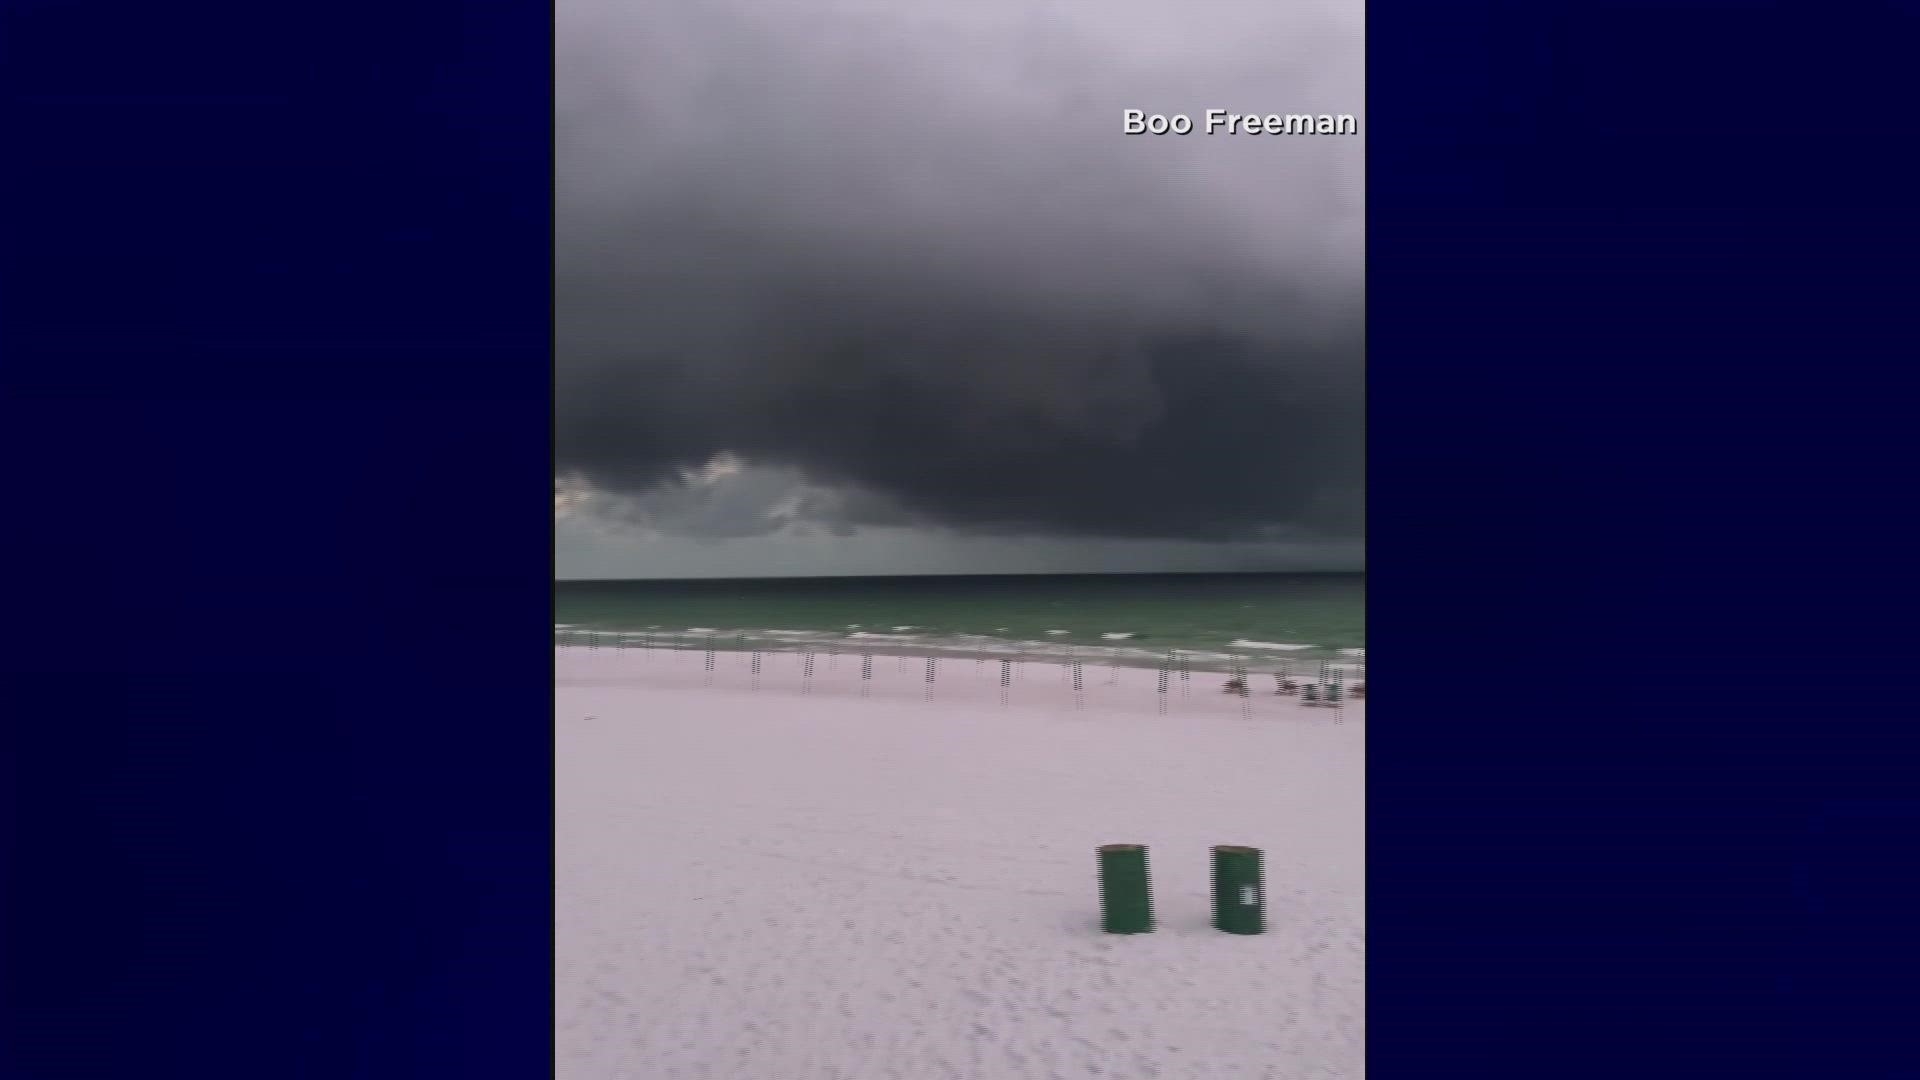 Video captures what appears to be a water spout or tornado off the waters of Henderson Beach in Destin, Florida.